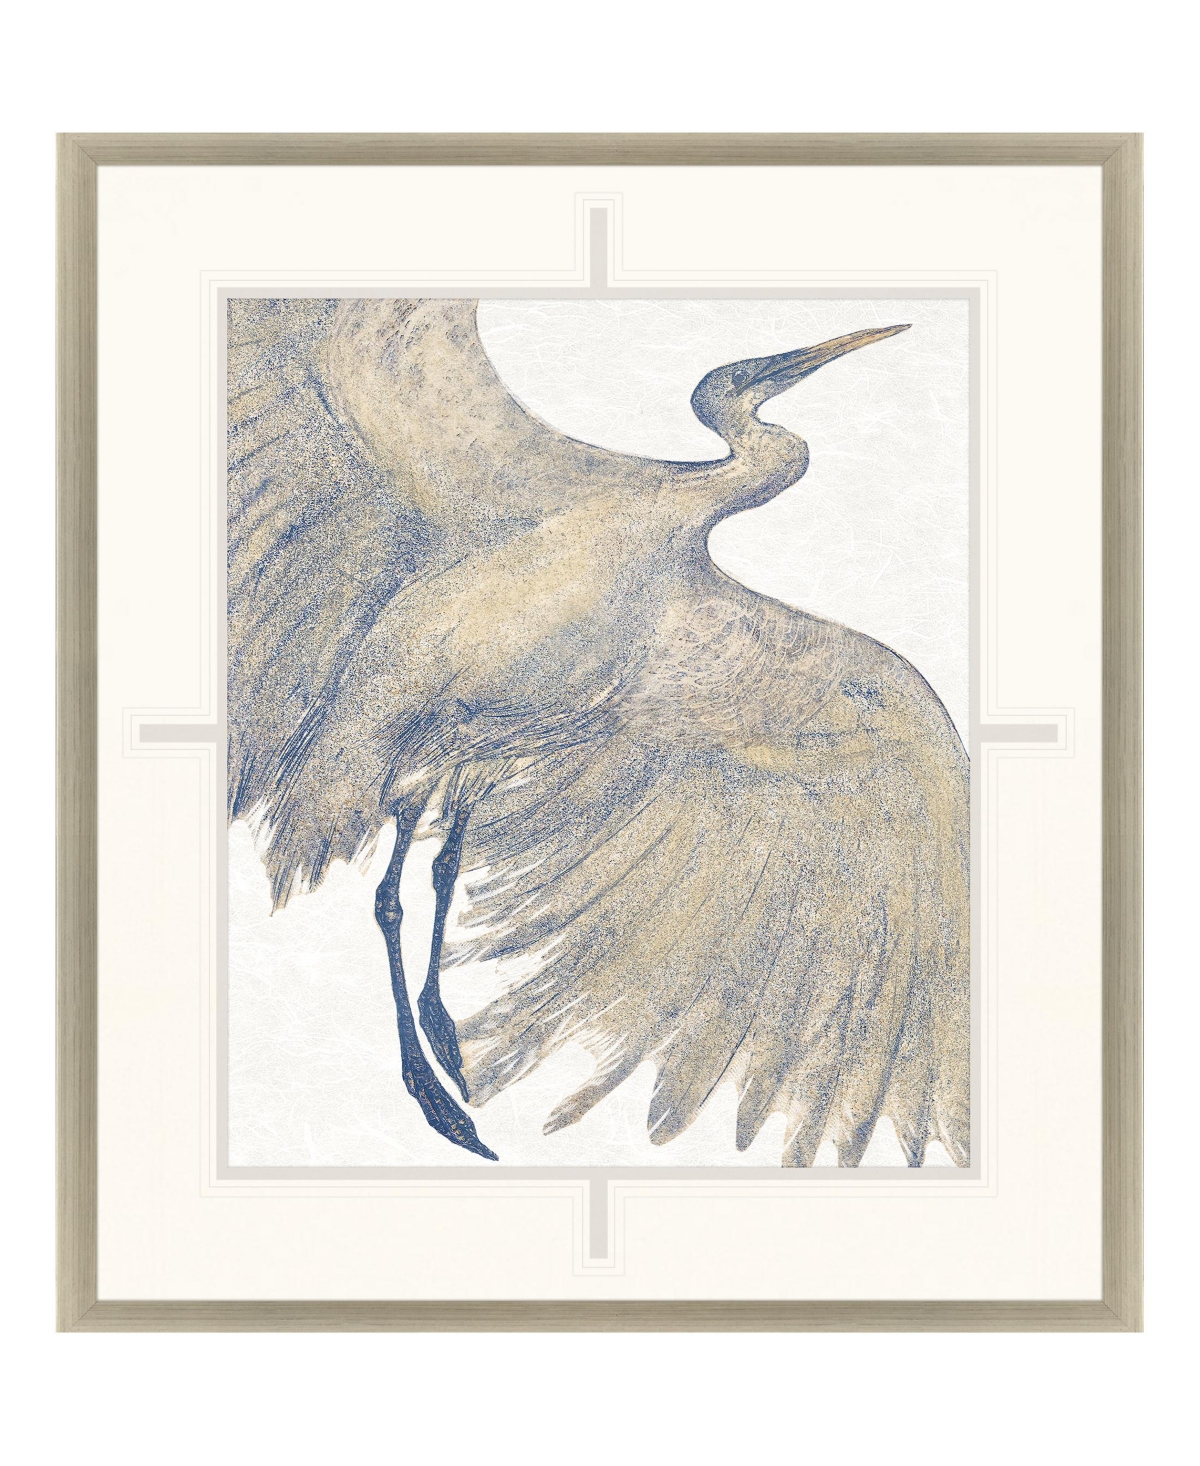 Paragon Picture Gallery Plumage I Framed Art In Beige